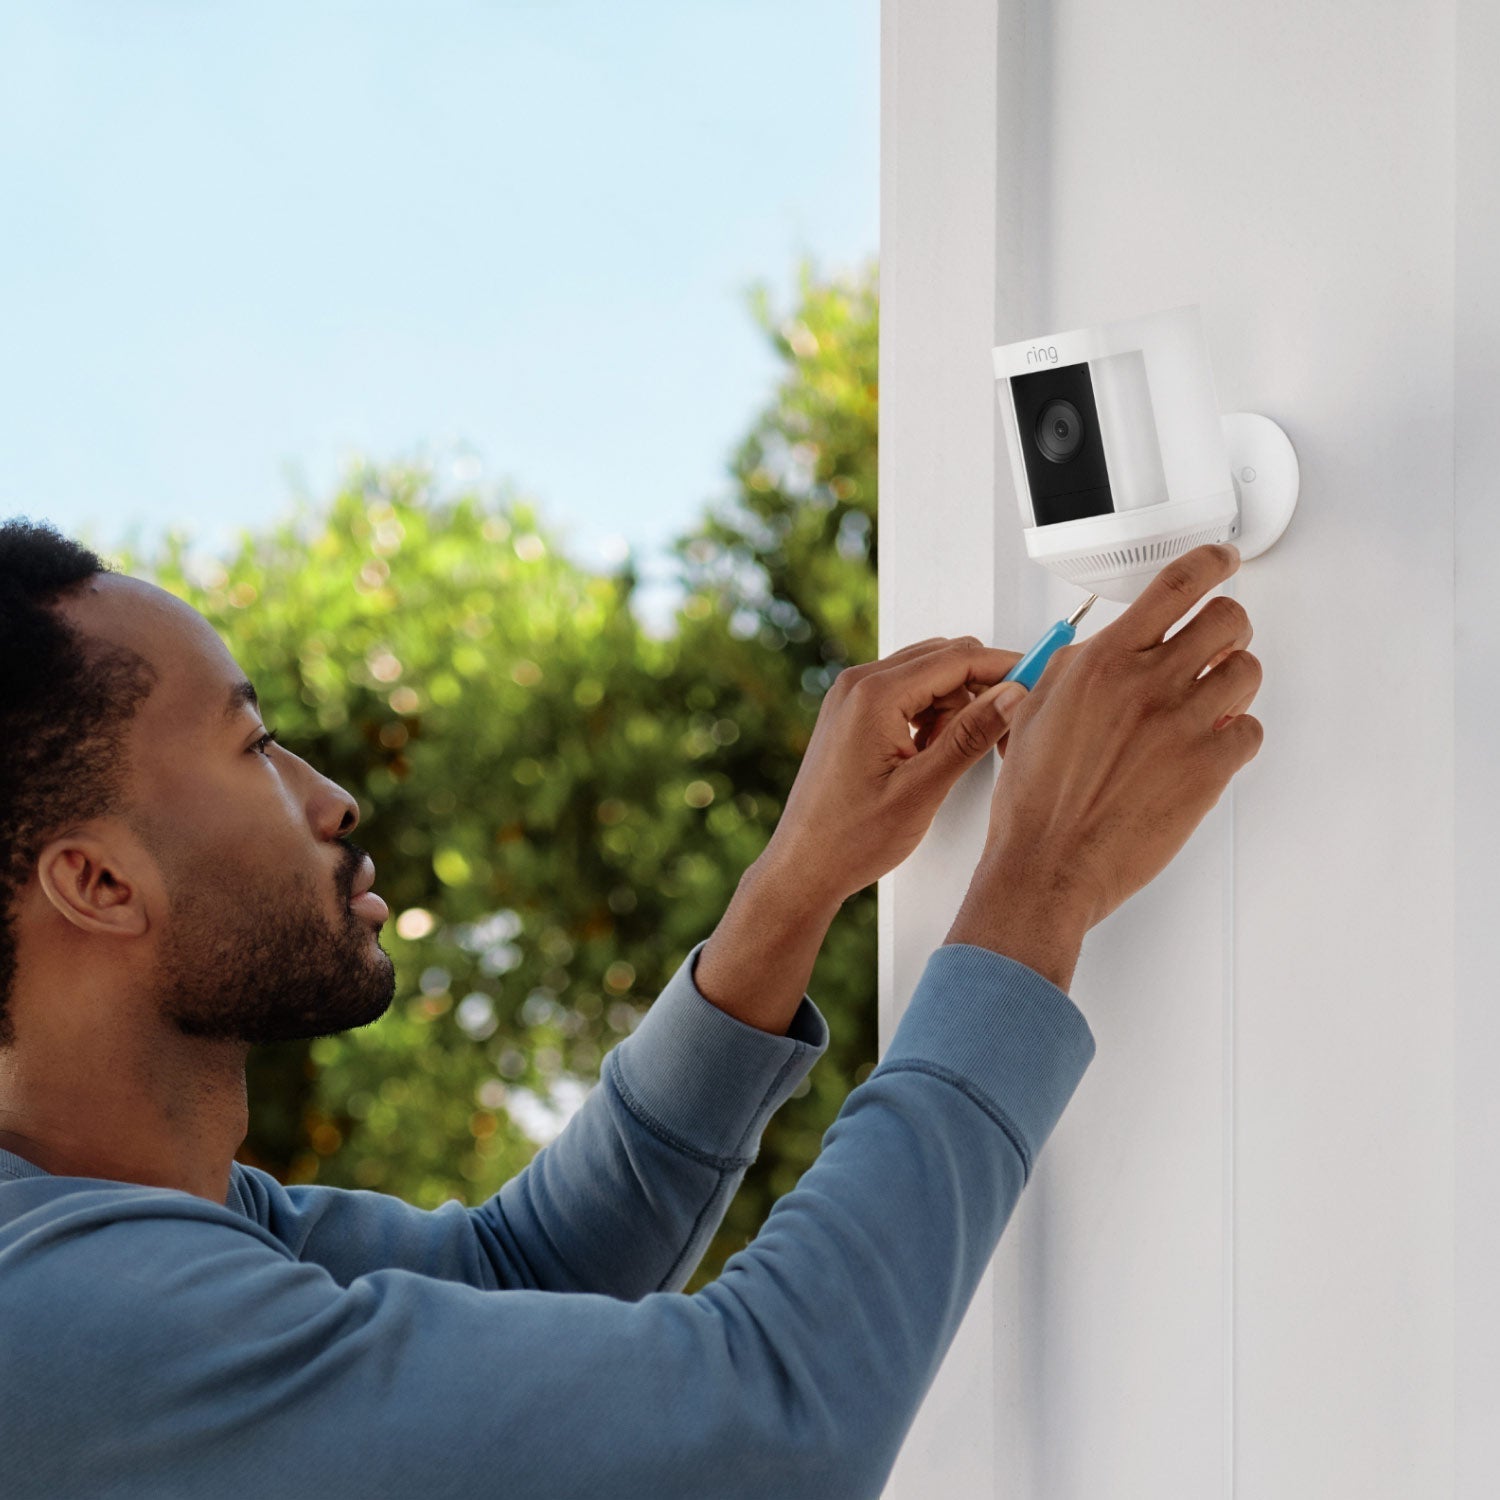 Spotlight Cam Plus (Plug-In) (for Certified Refurbished) - Man installing Spotlight Cam Plus, Plug-In model in white on exterior wall of home.